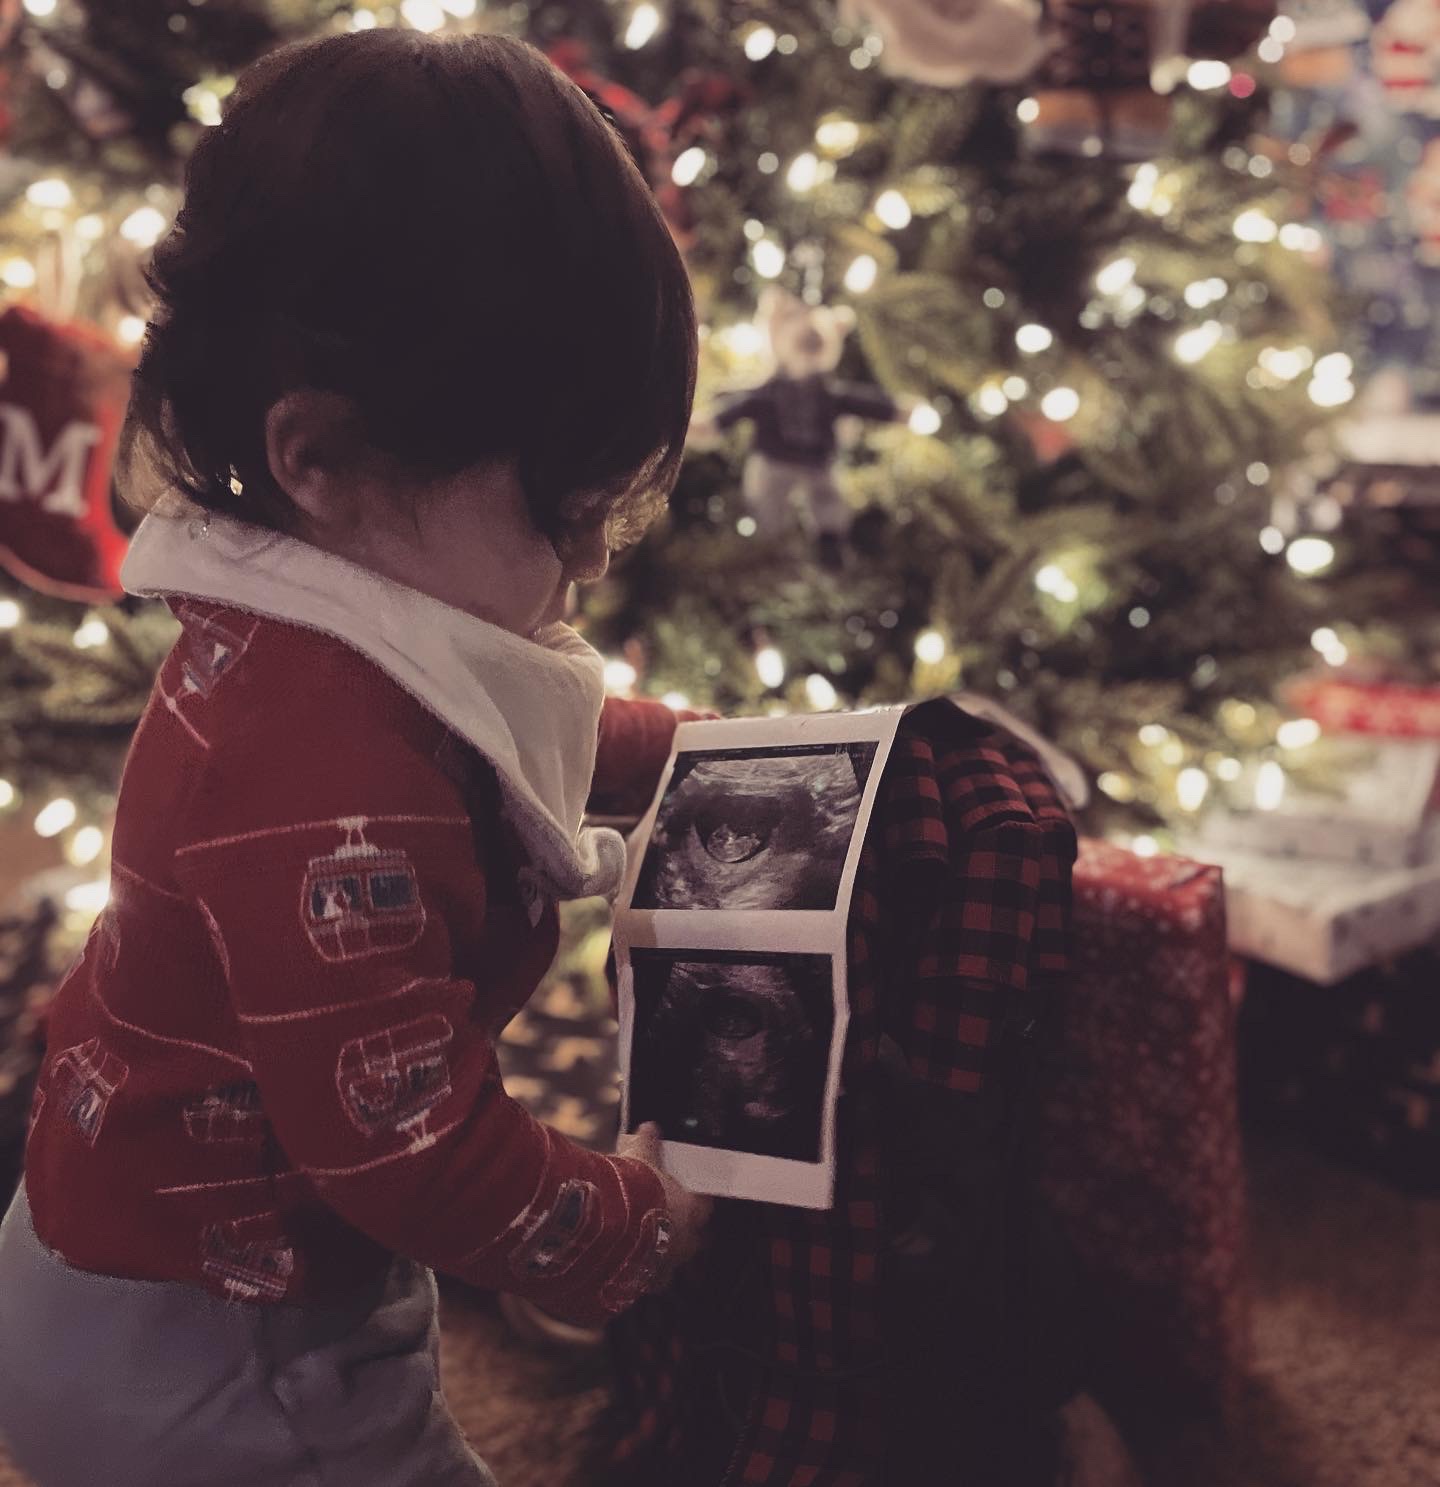 A baby looks at ultrasound pictures near a Christmas tree